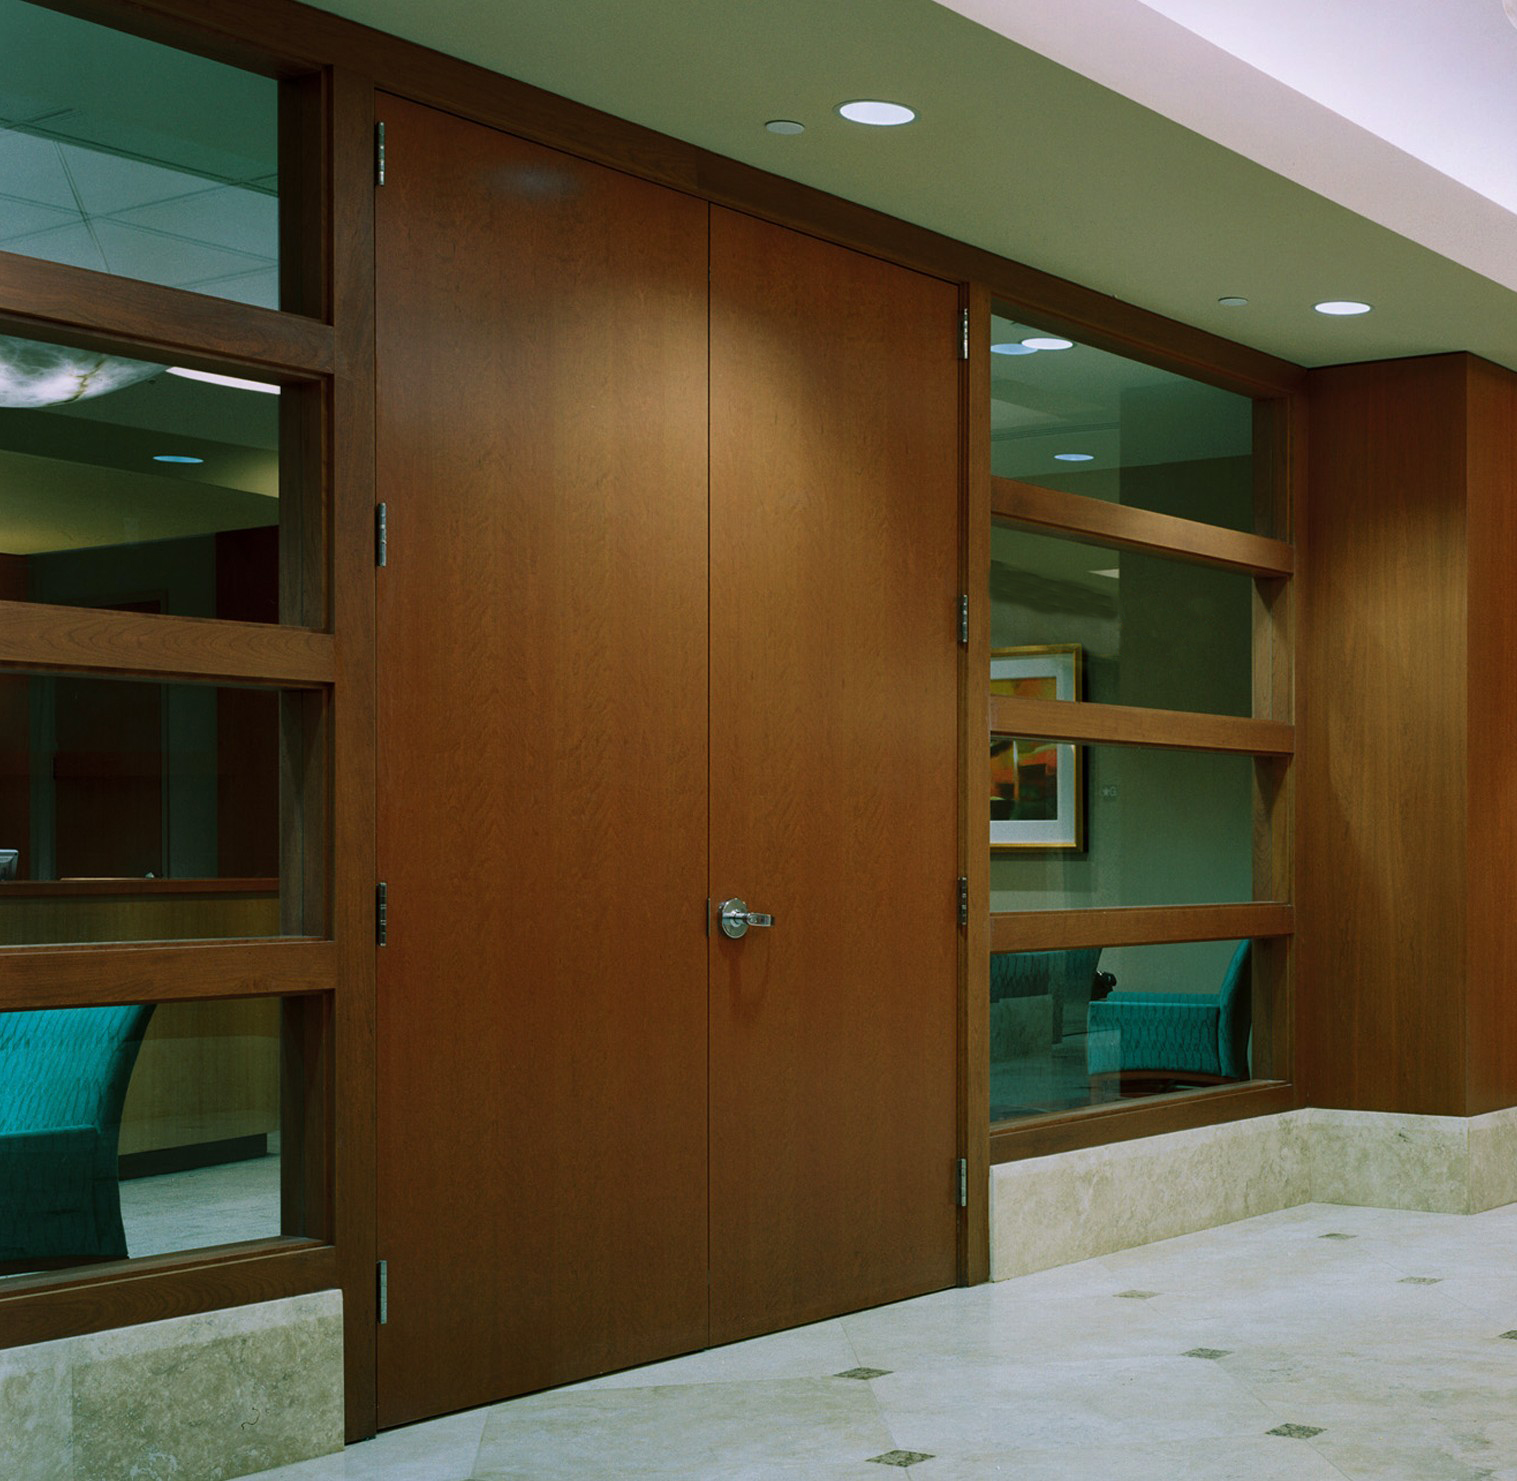 Matching meeting room doors and paneling